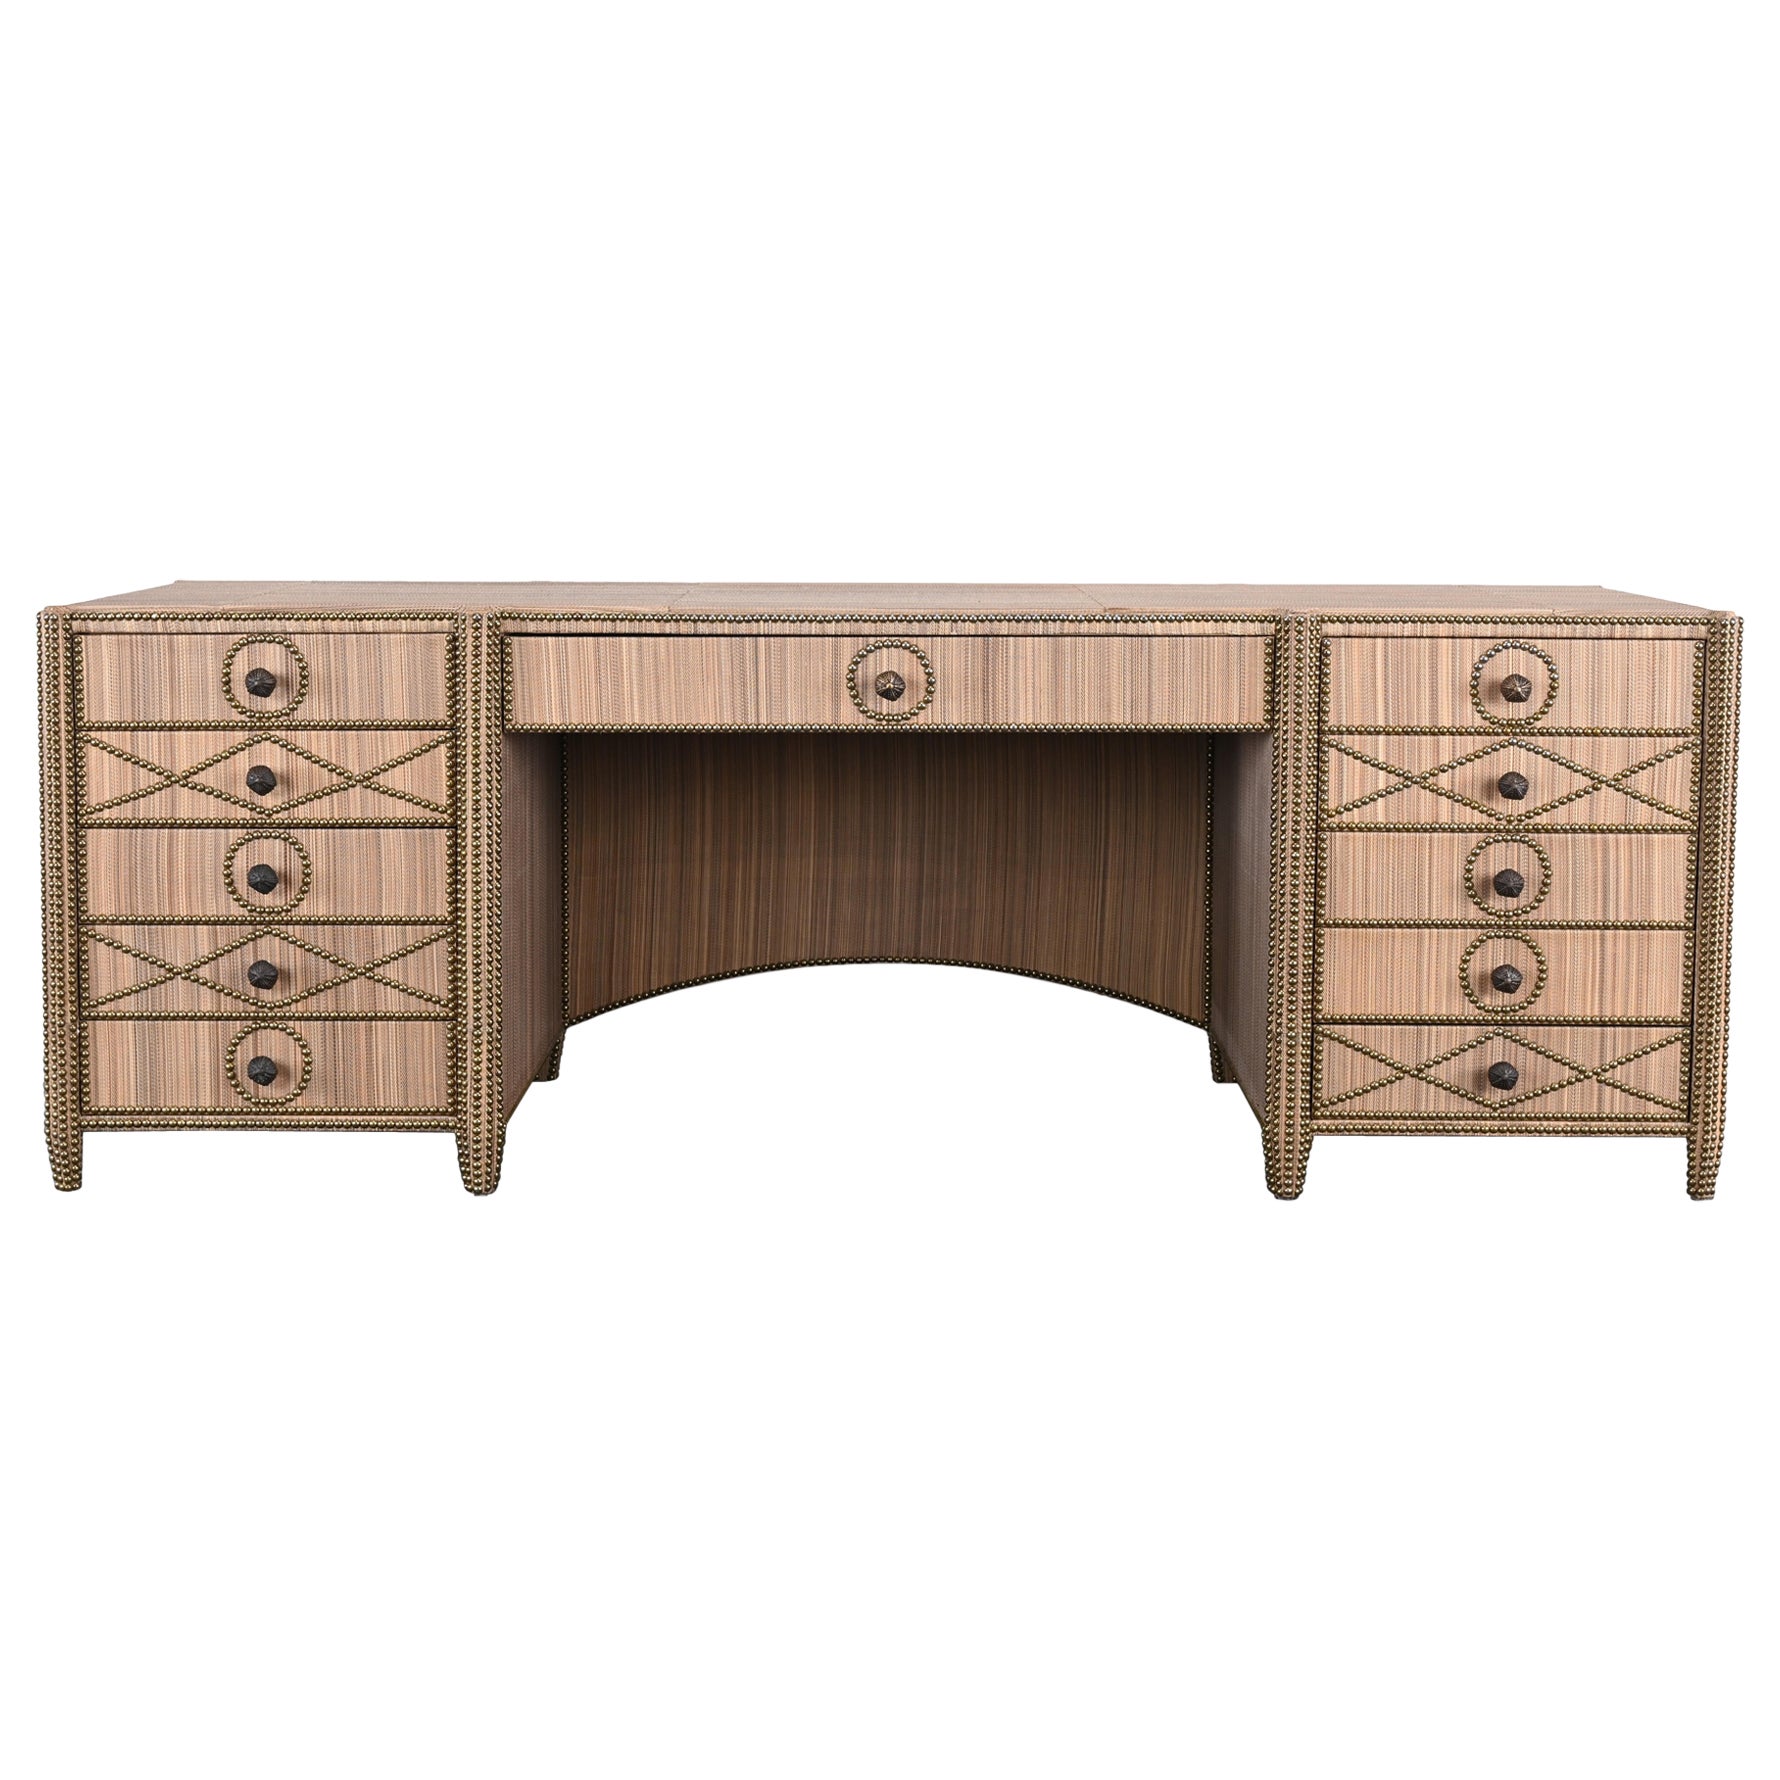 Monumental Custom Horsehair Desk by Peter Marino, 20th Century USA For Sale